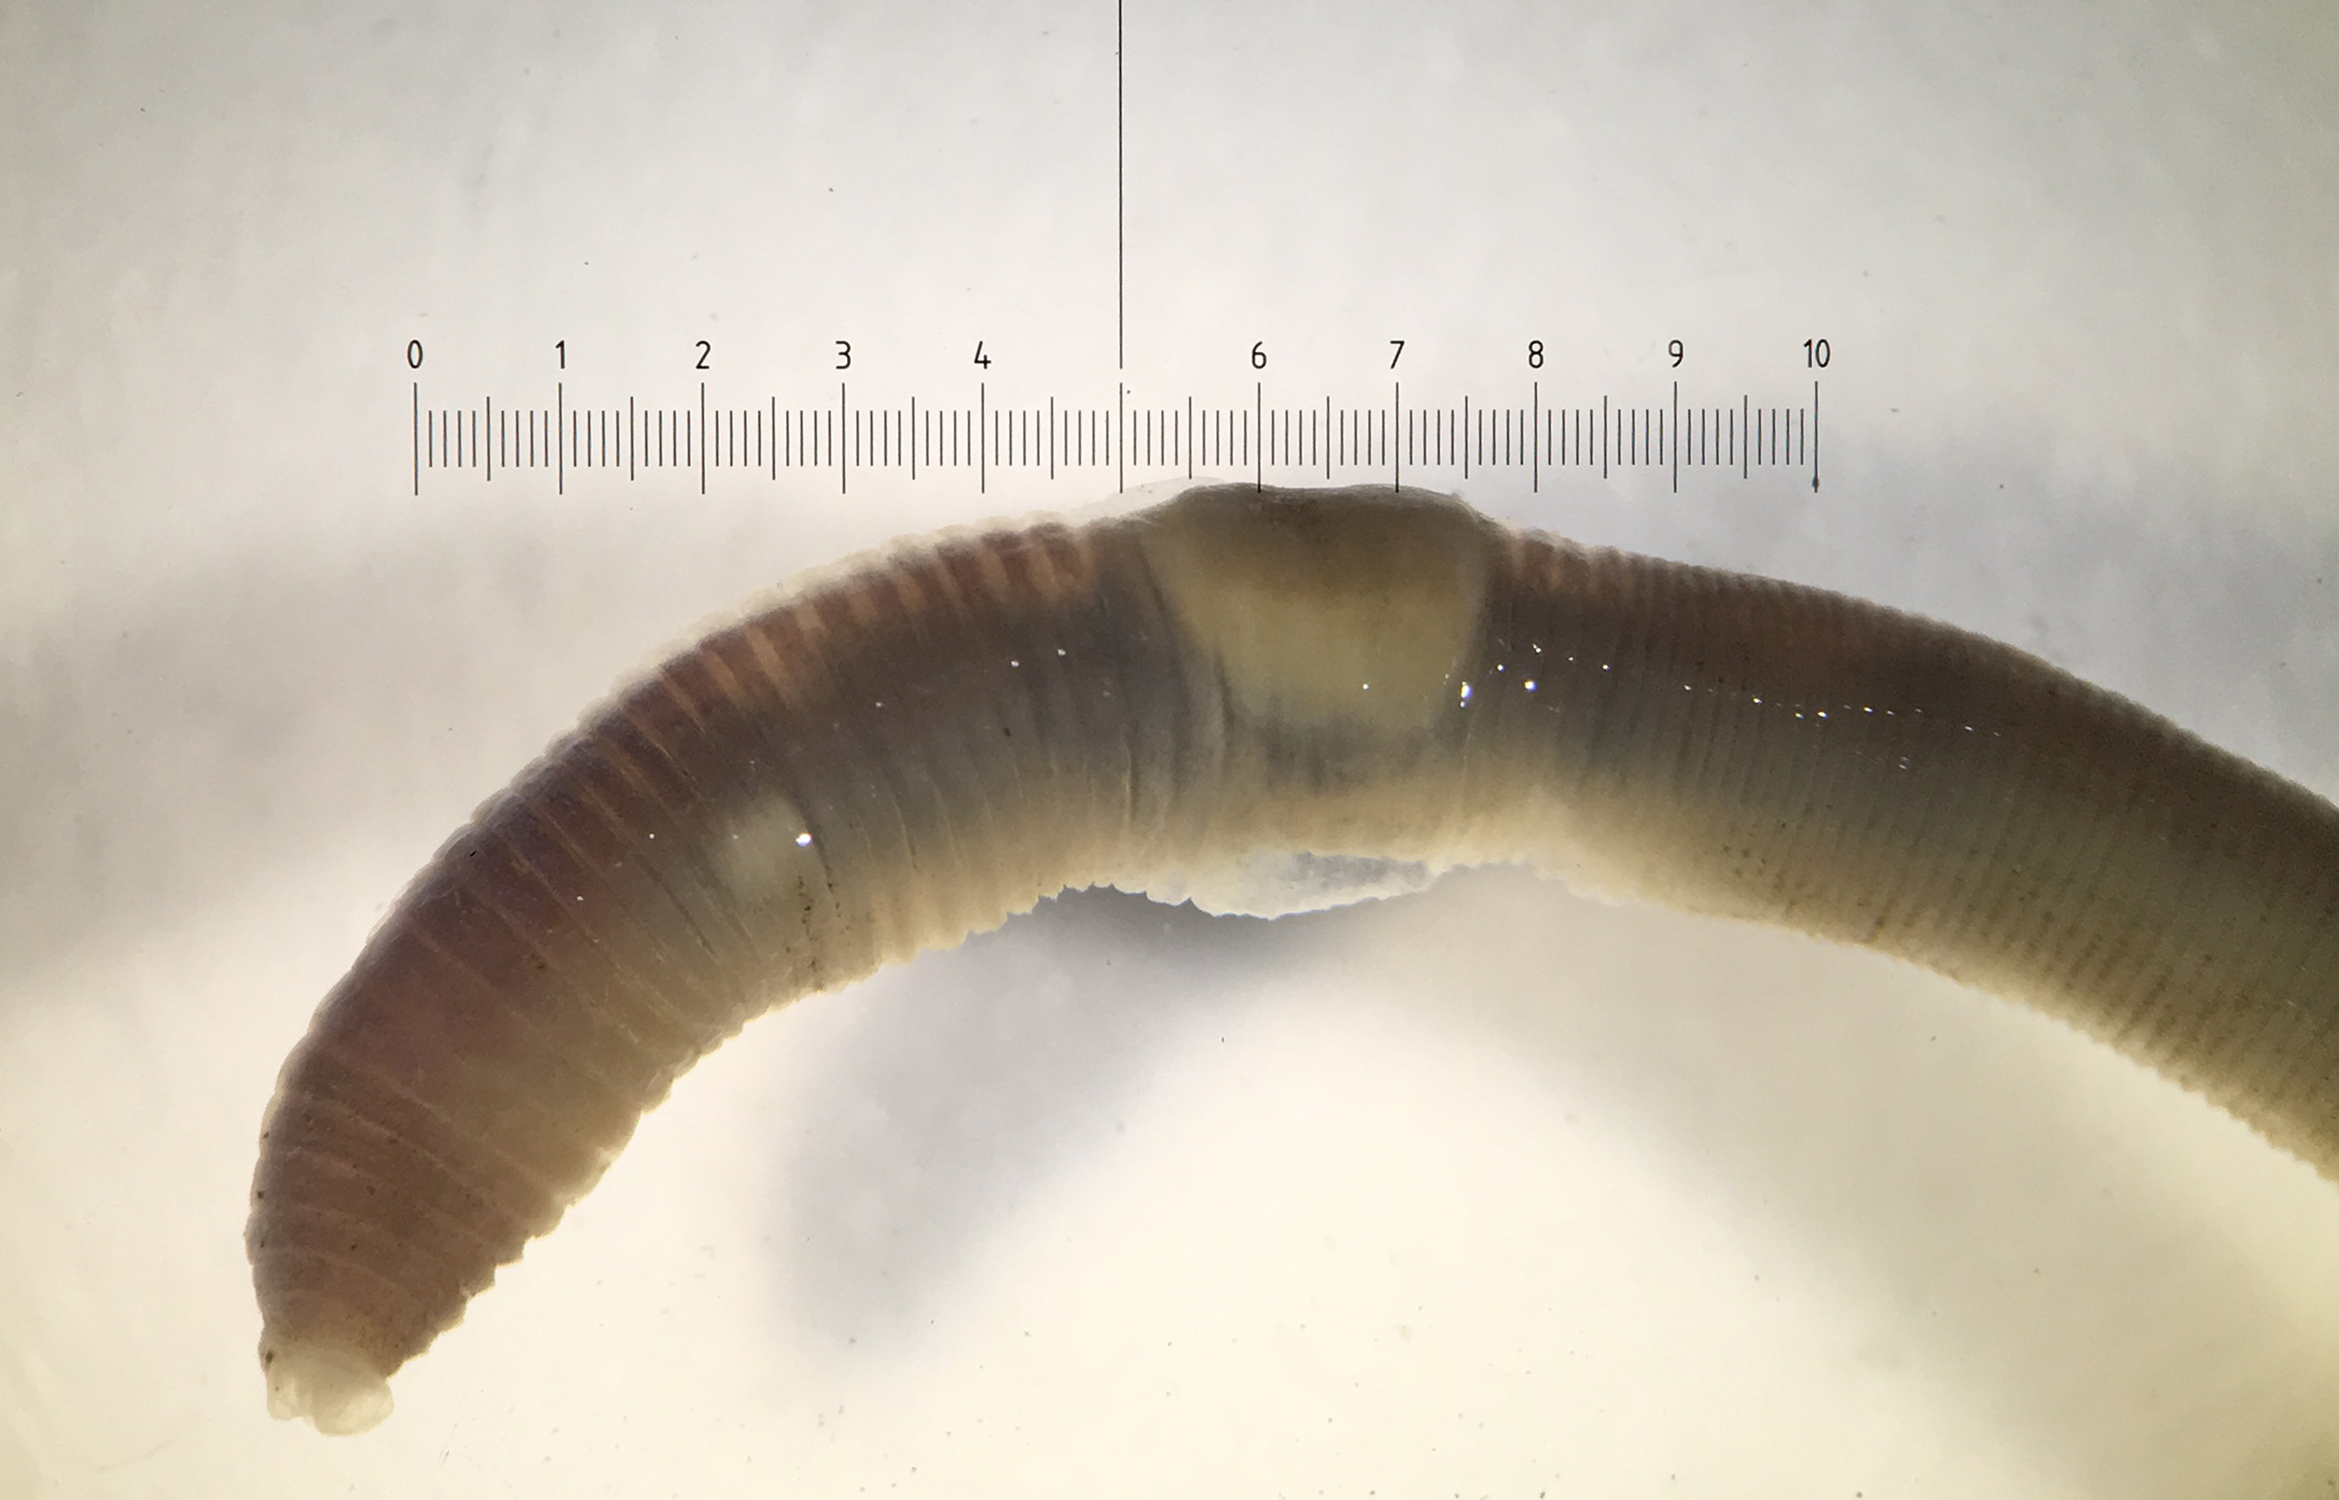 Photo by Derek Sikes, UAM:Ento:366417. This earthworm specimen (Bimastos rubidus) was collected in North Pole and is presumed native to Alaska. The scale bar represents 10 mm.